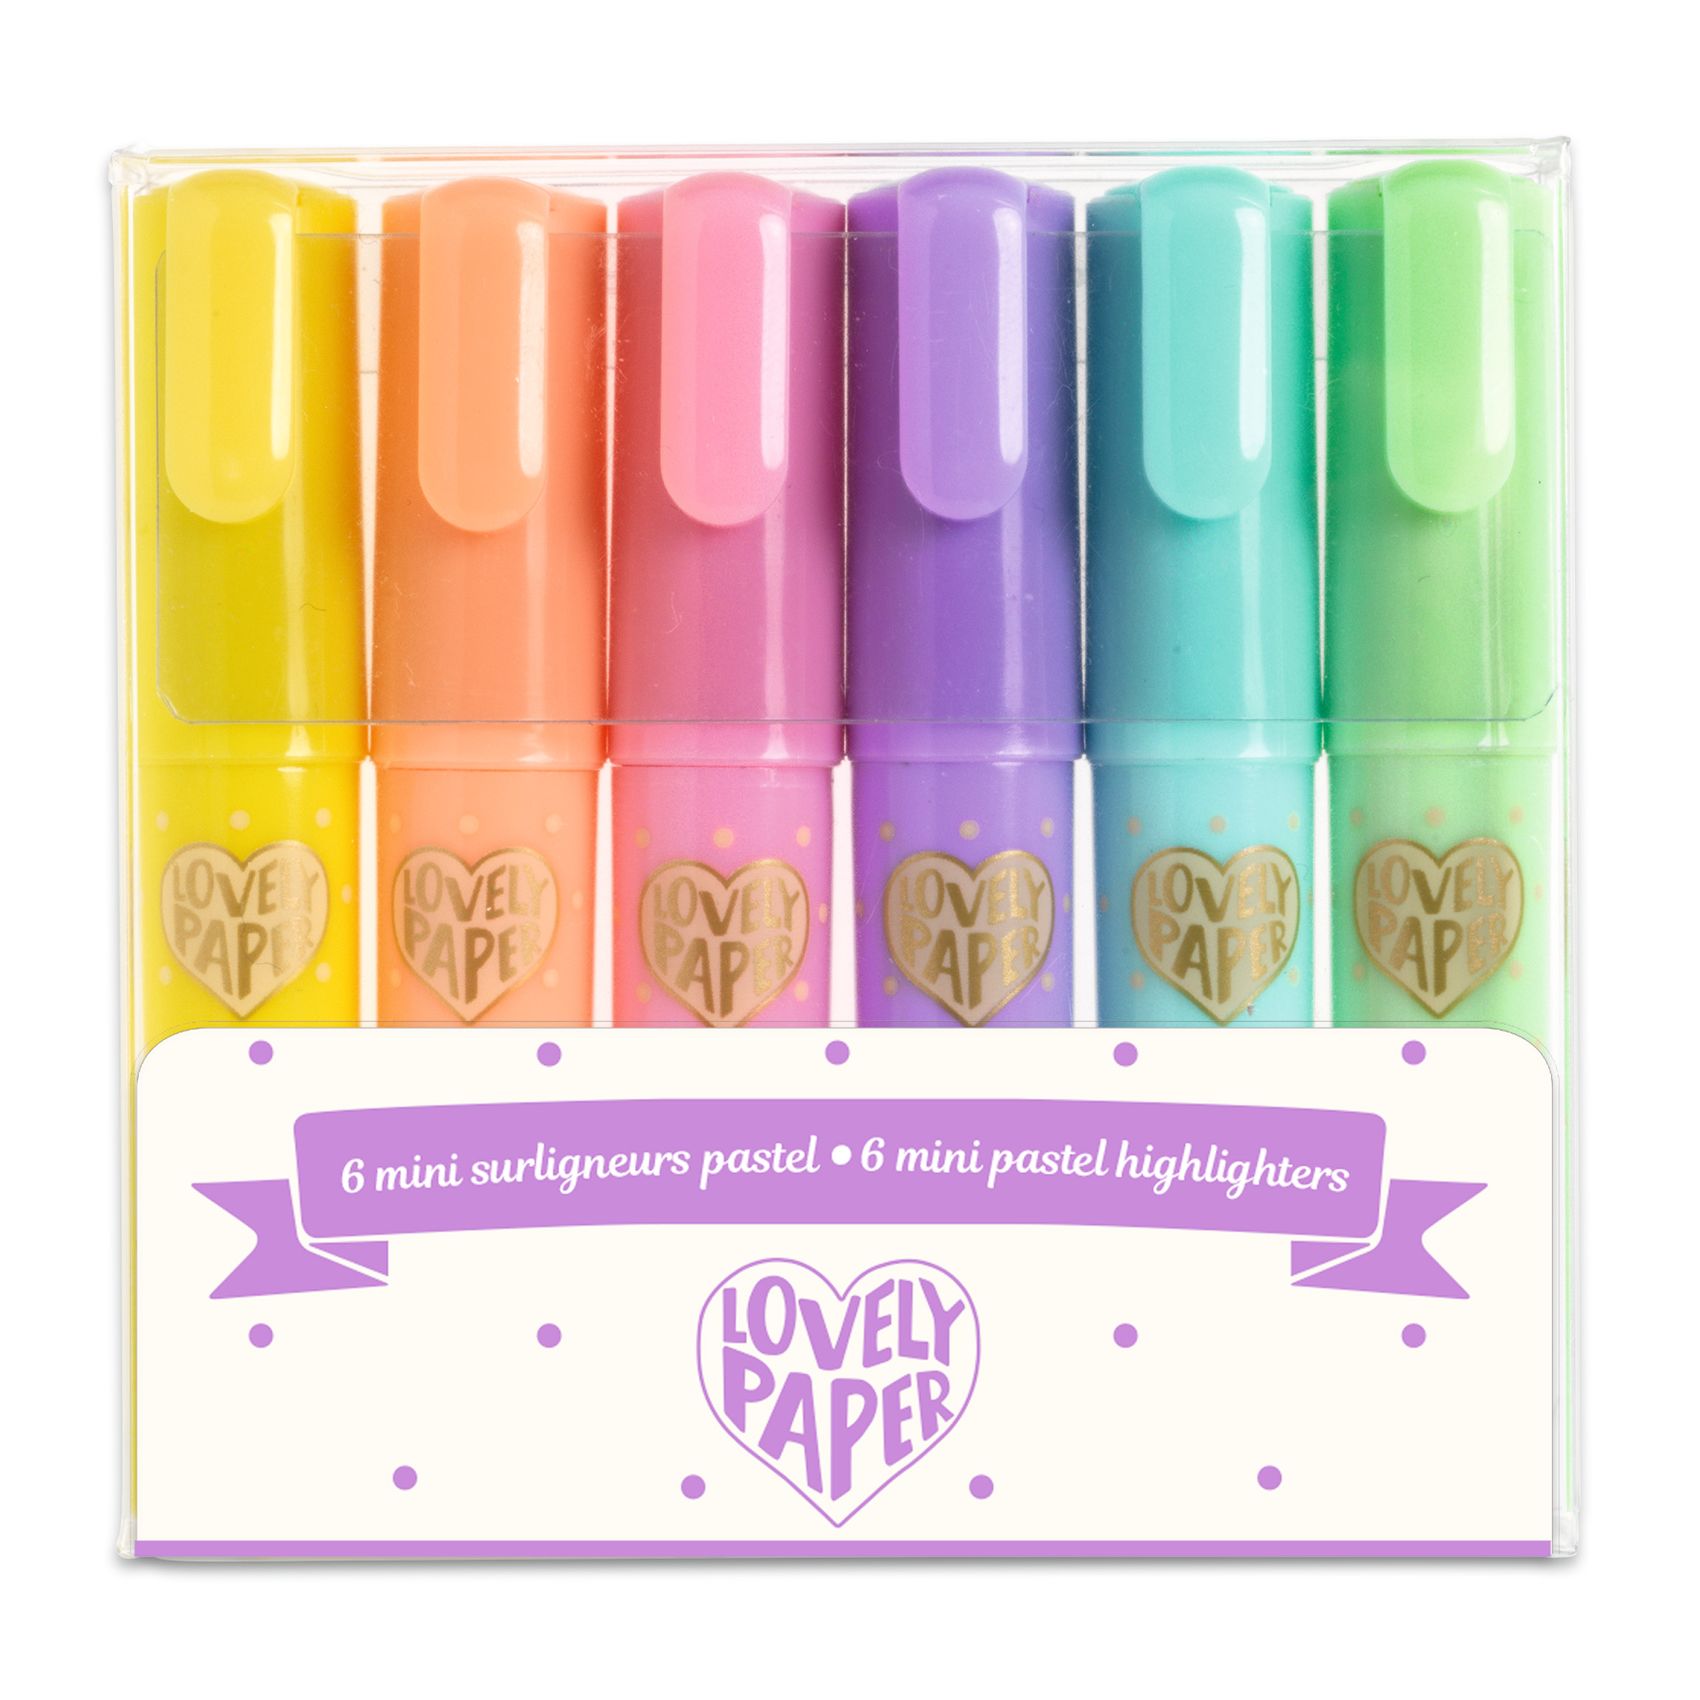 mini pastels highlighters by lovely paper for Djeco